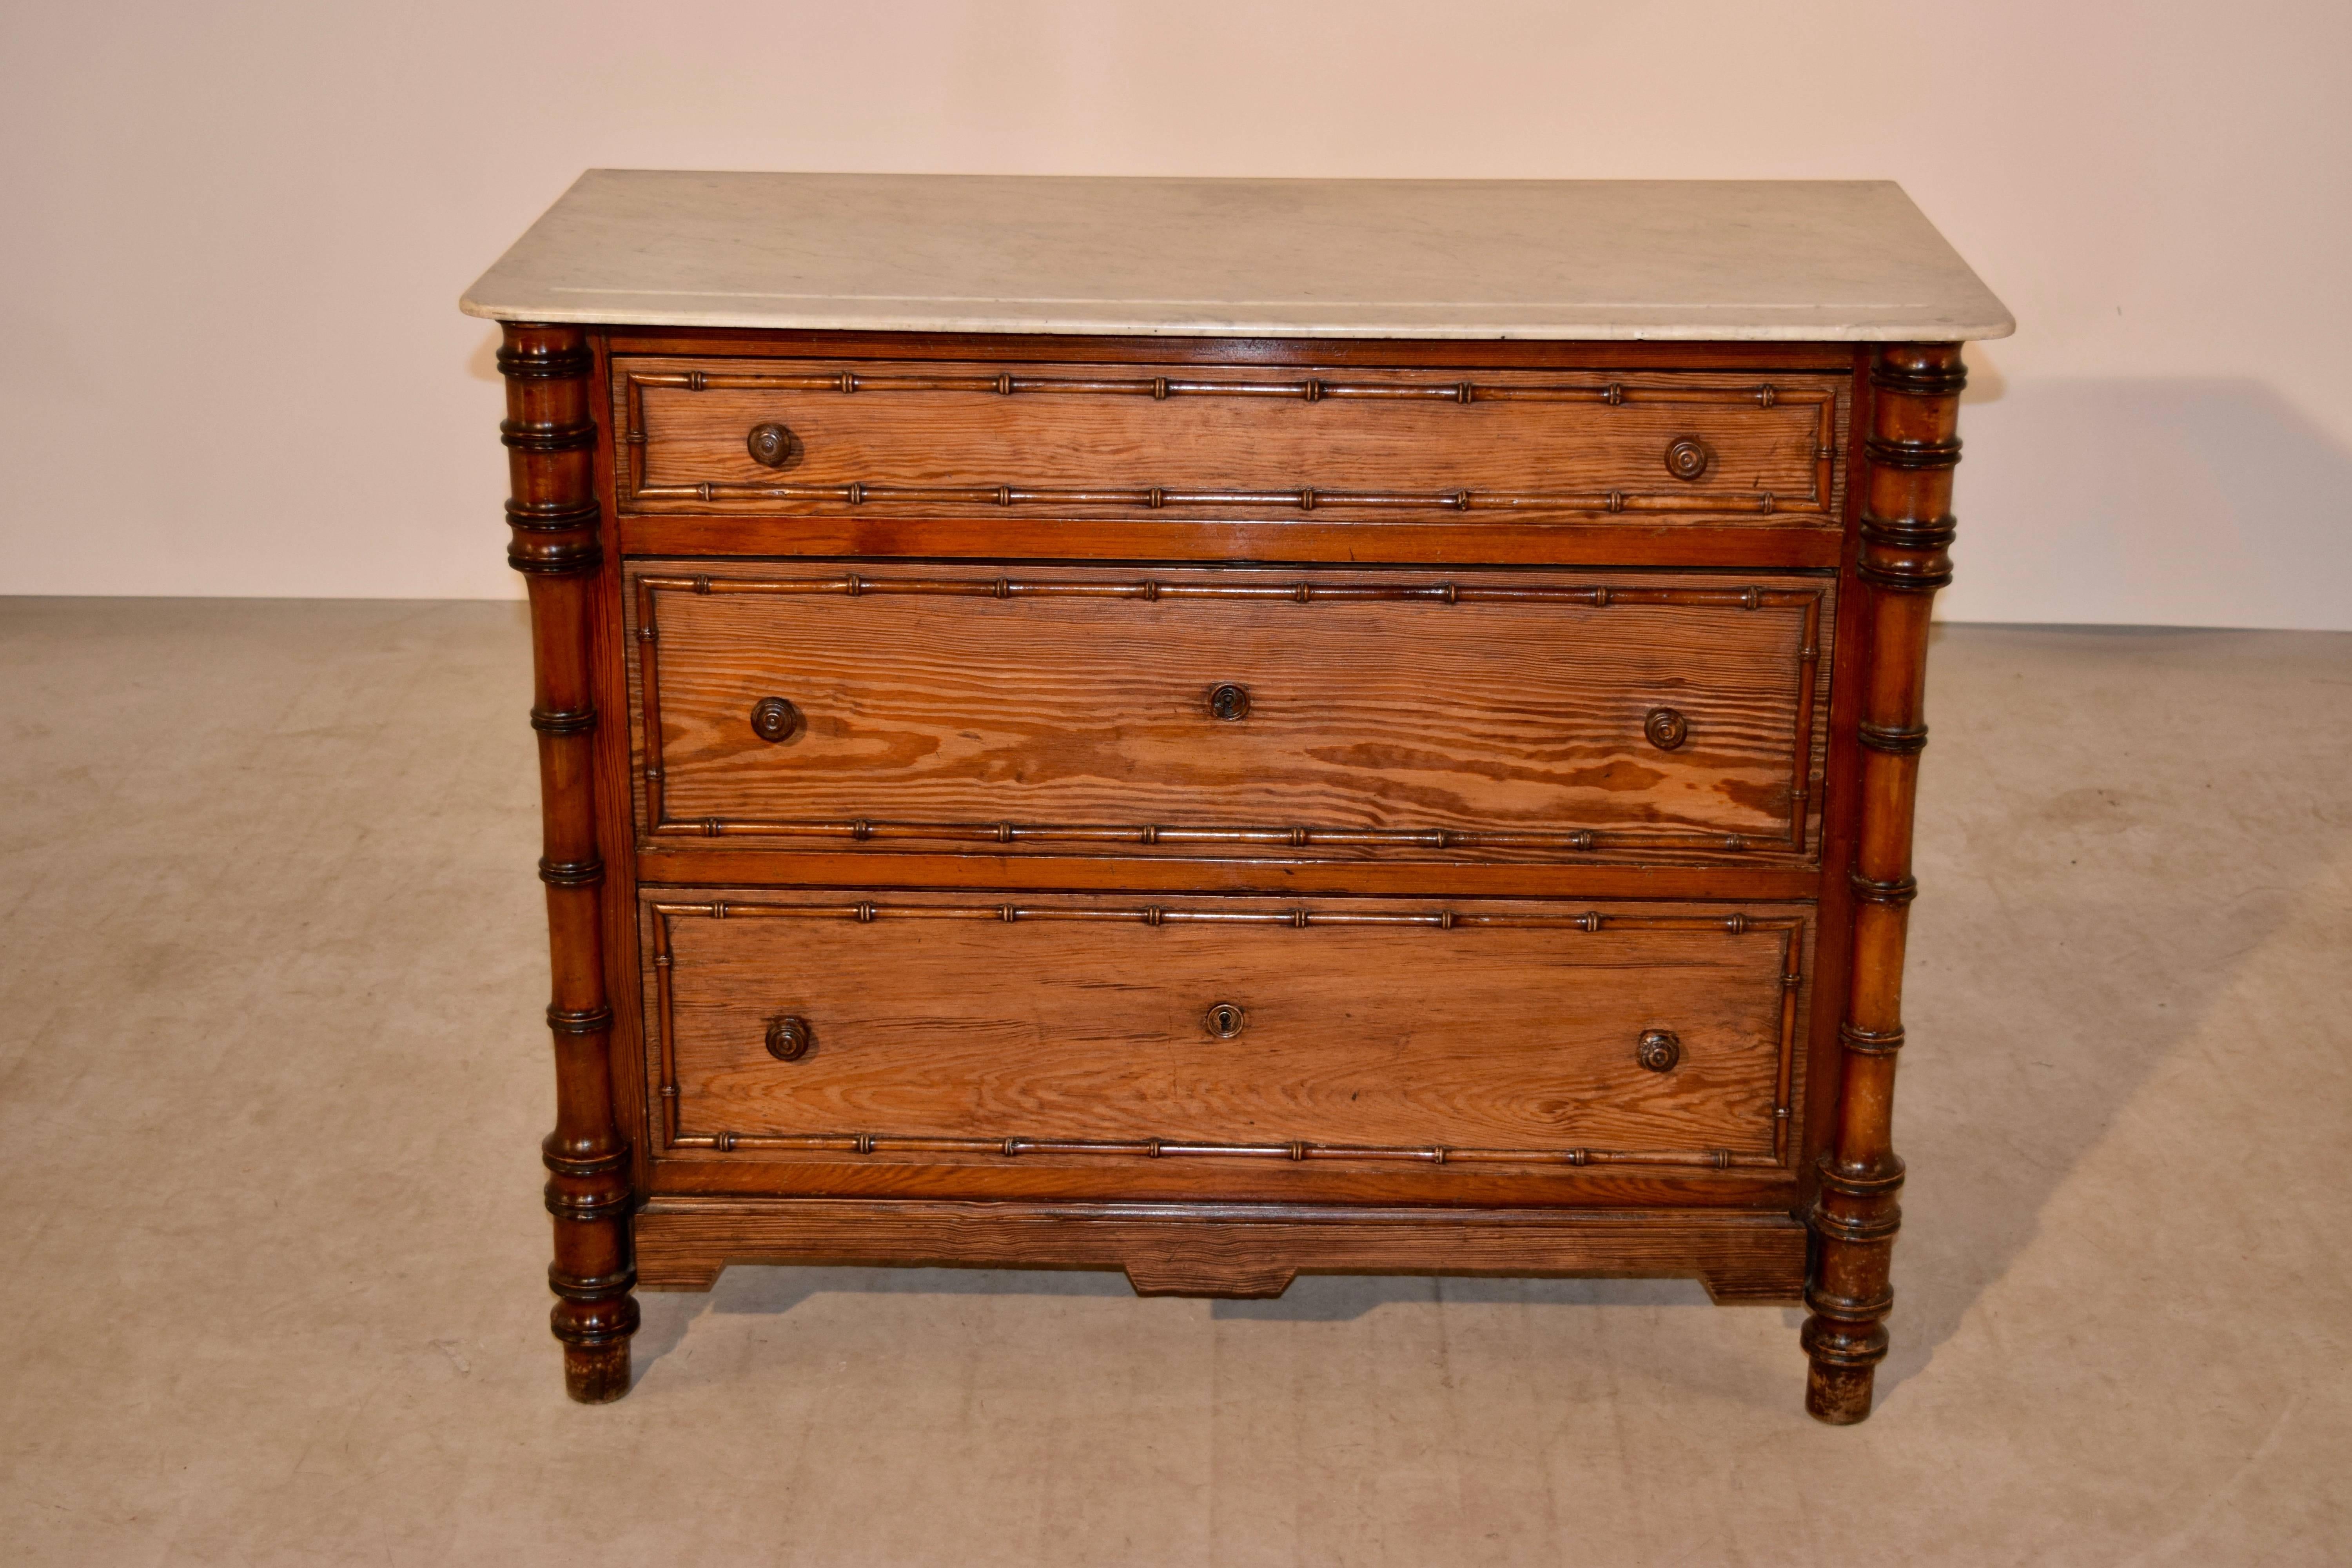 19th century pitch pine chest from France with a marble top, following down to paneled sides and three drawers in the front, with faux bamboo carved molding surrounding the drawers, and flanked with faux bamboo turned columns. The apron is shaped on